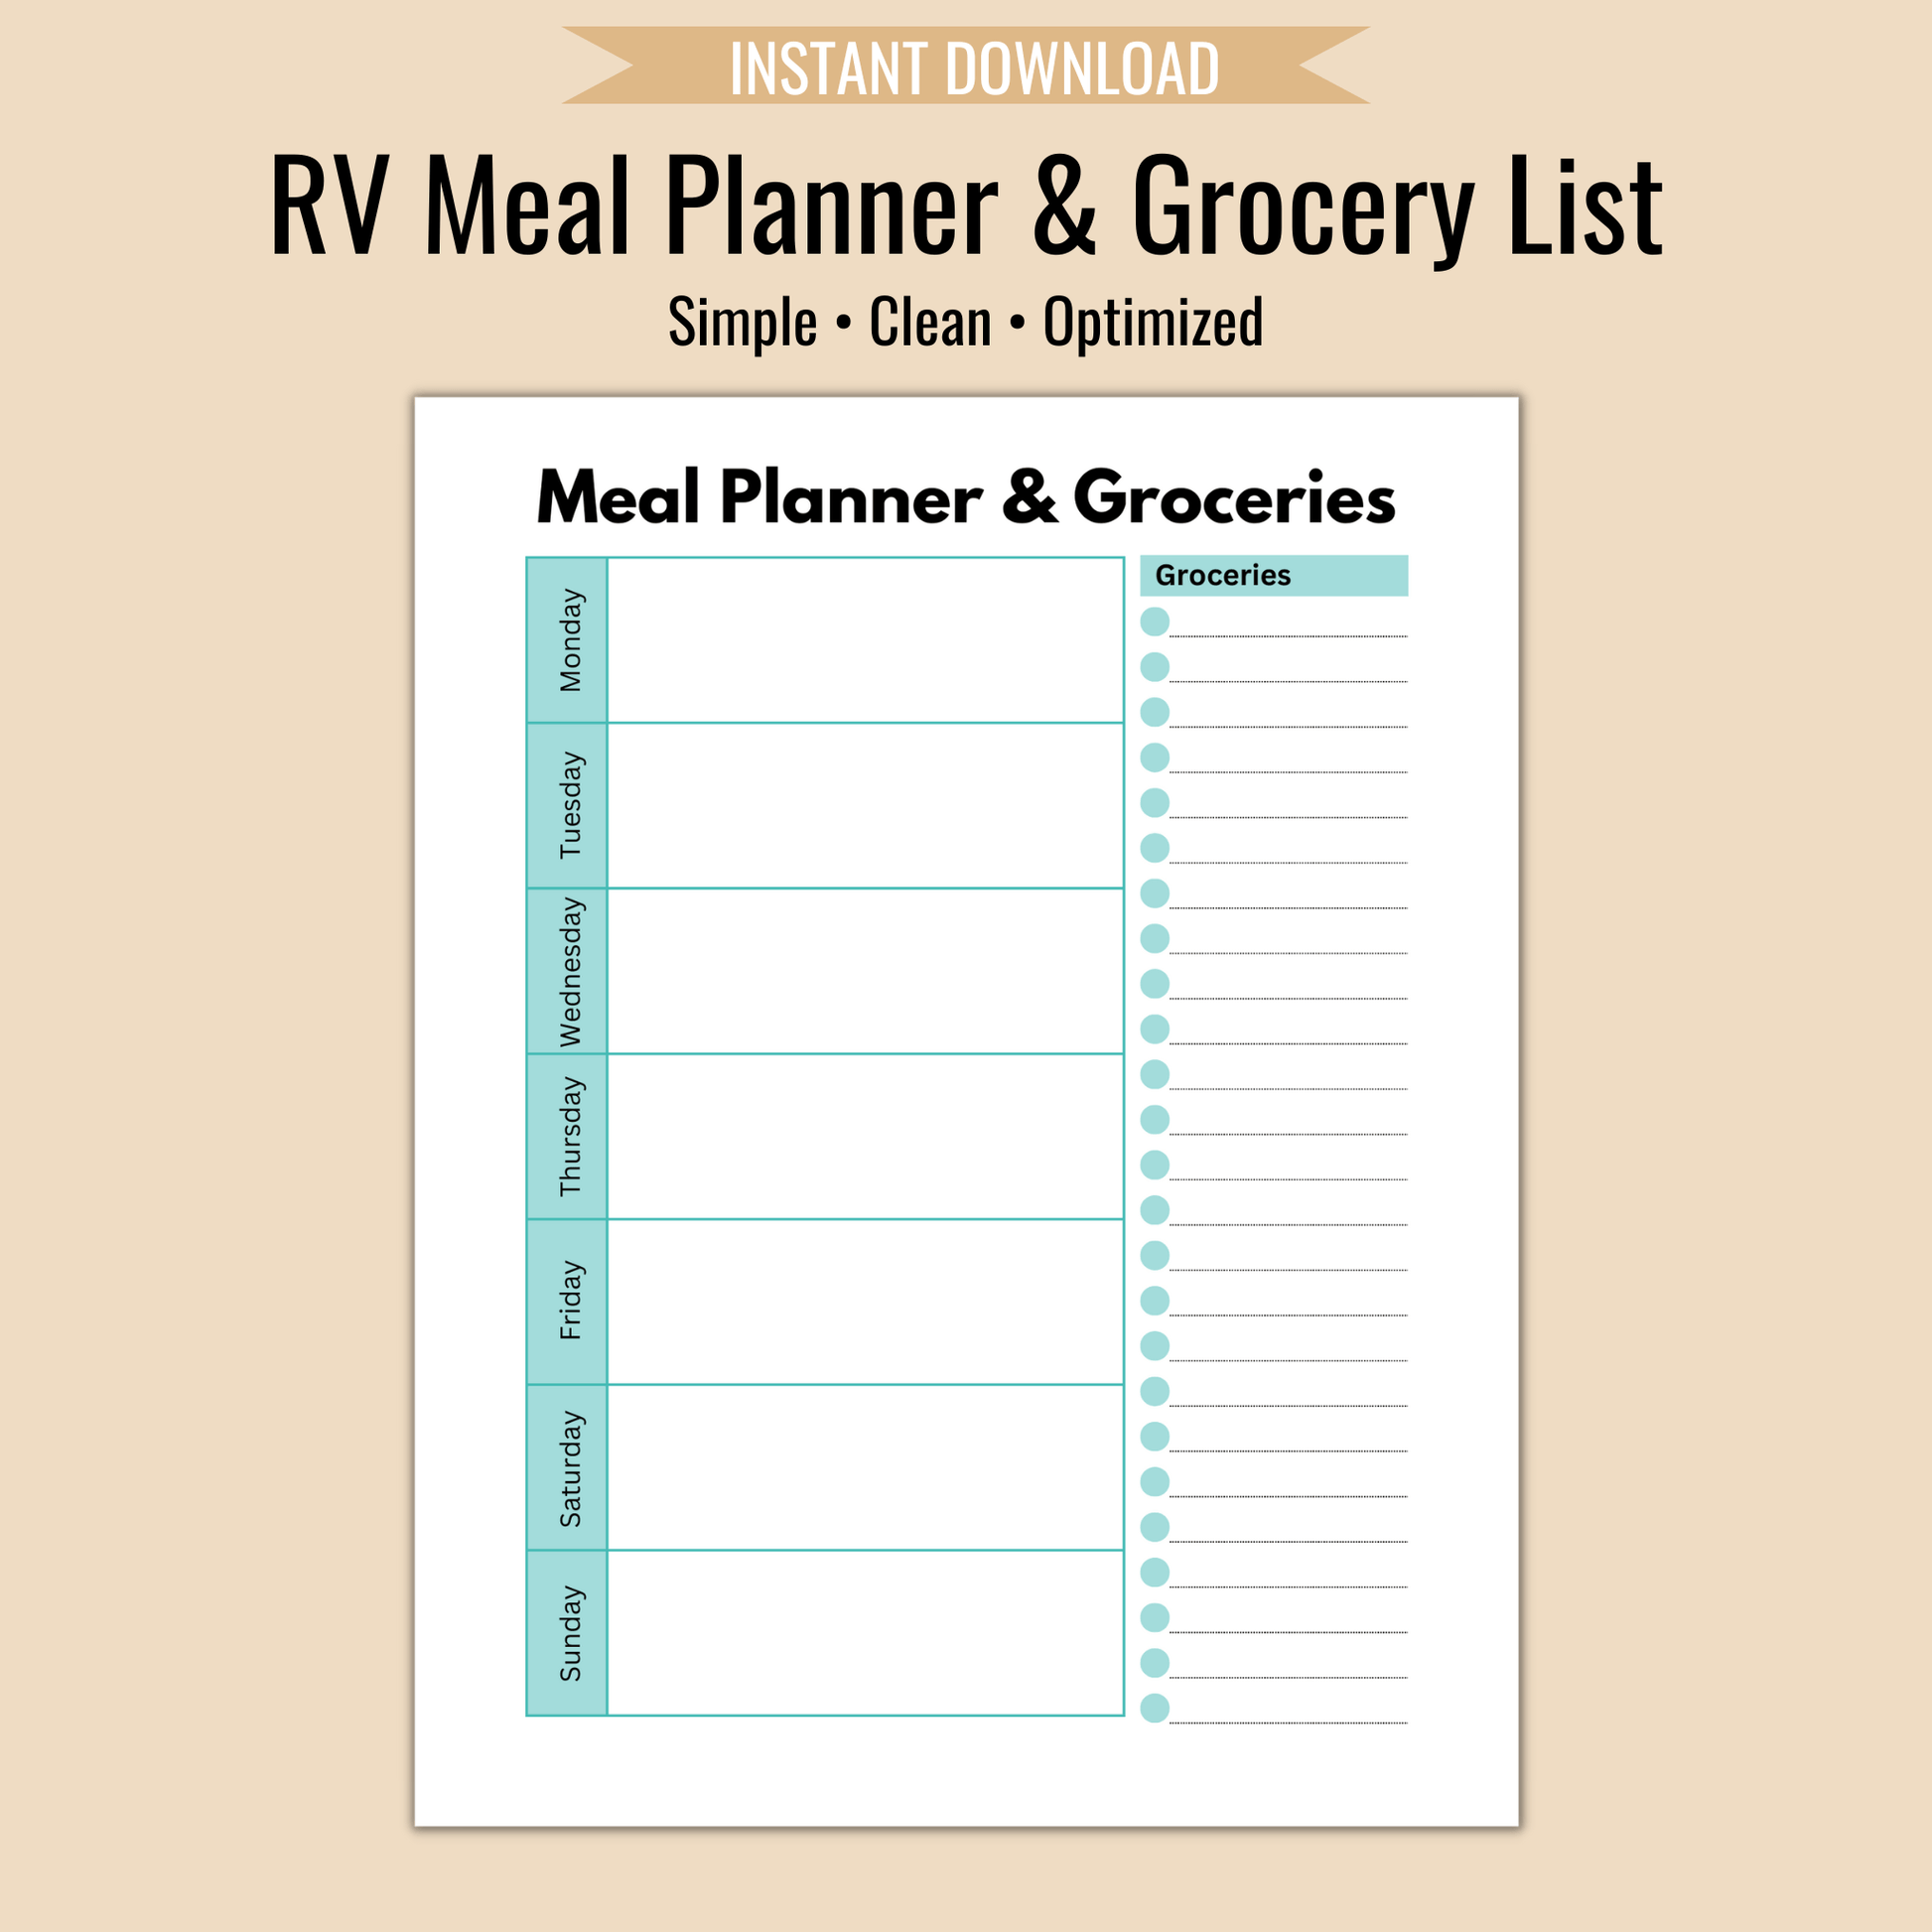 RV Meal Planner & Grocery List - Camper FAQs